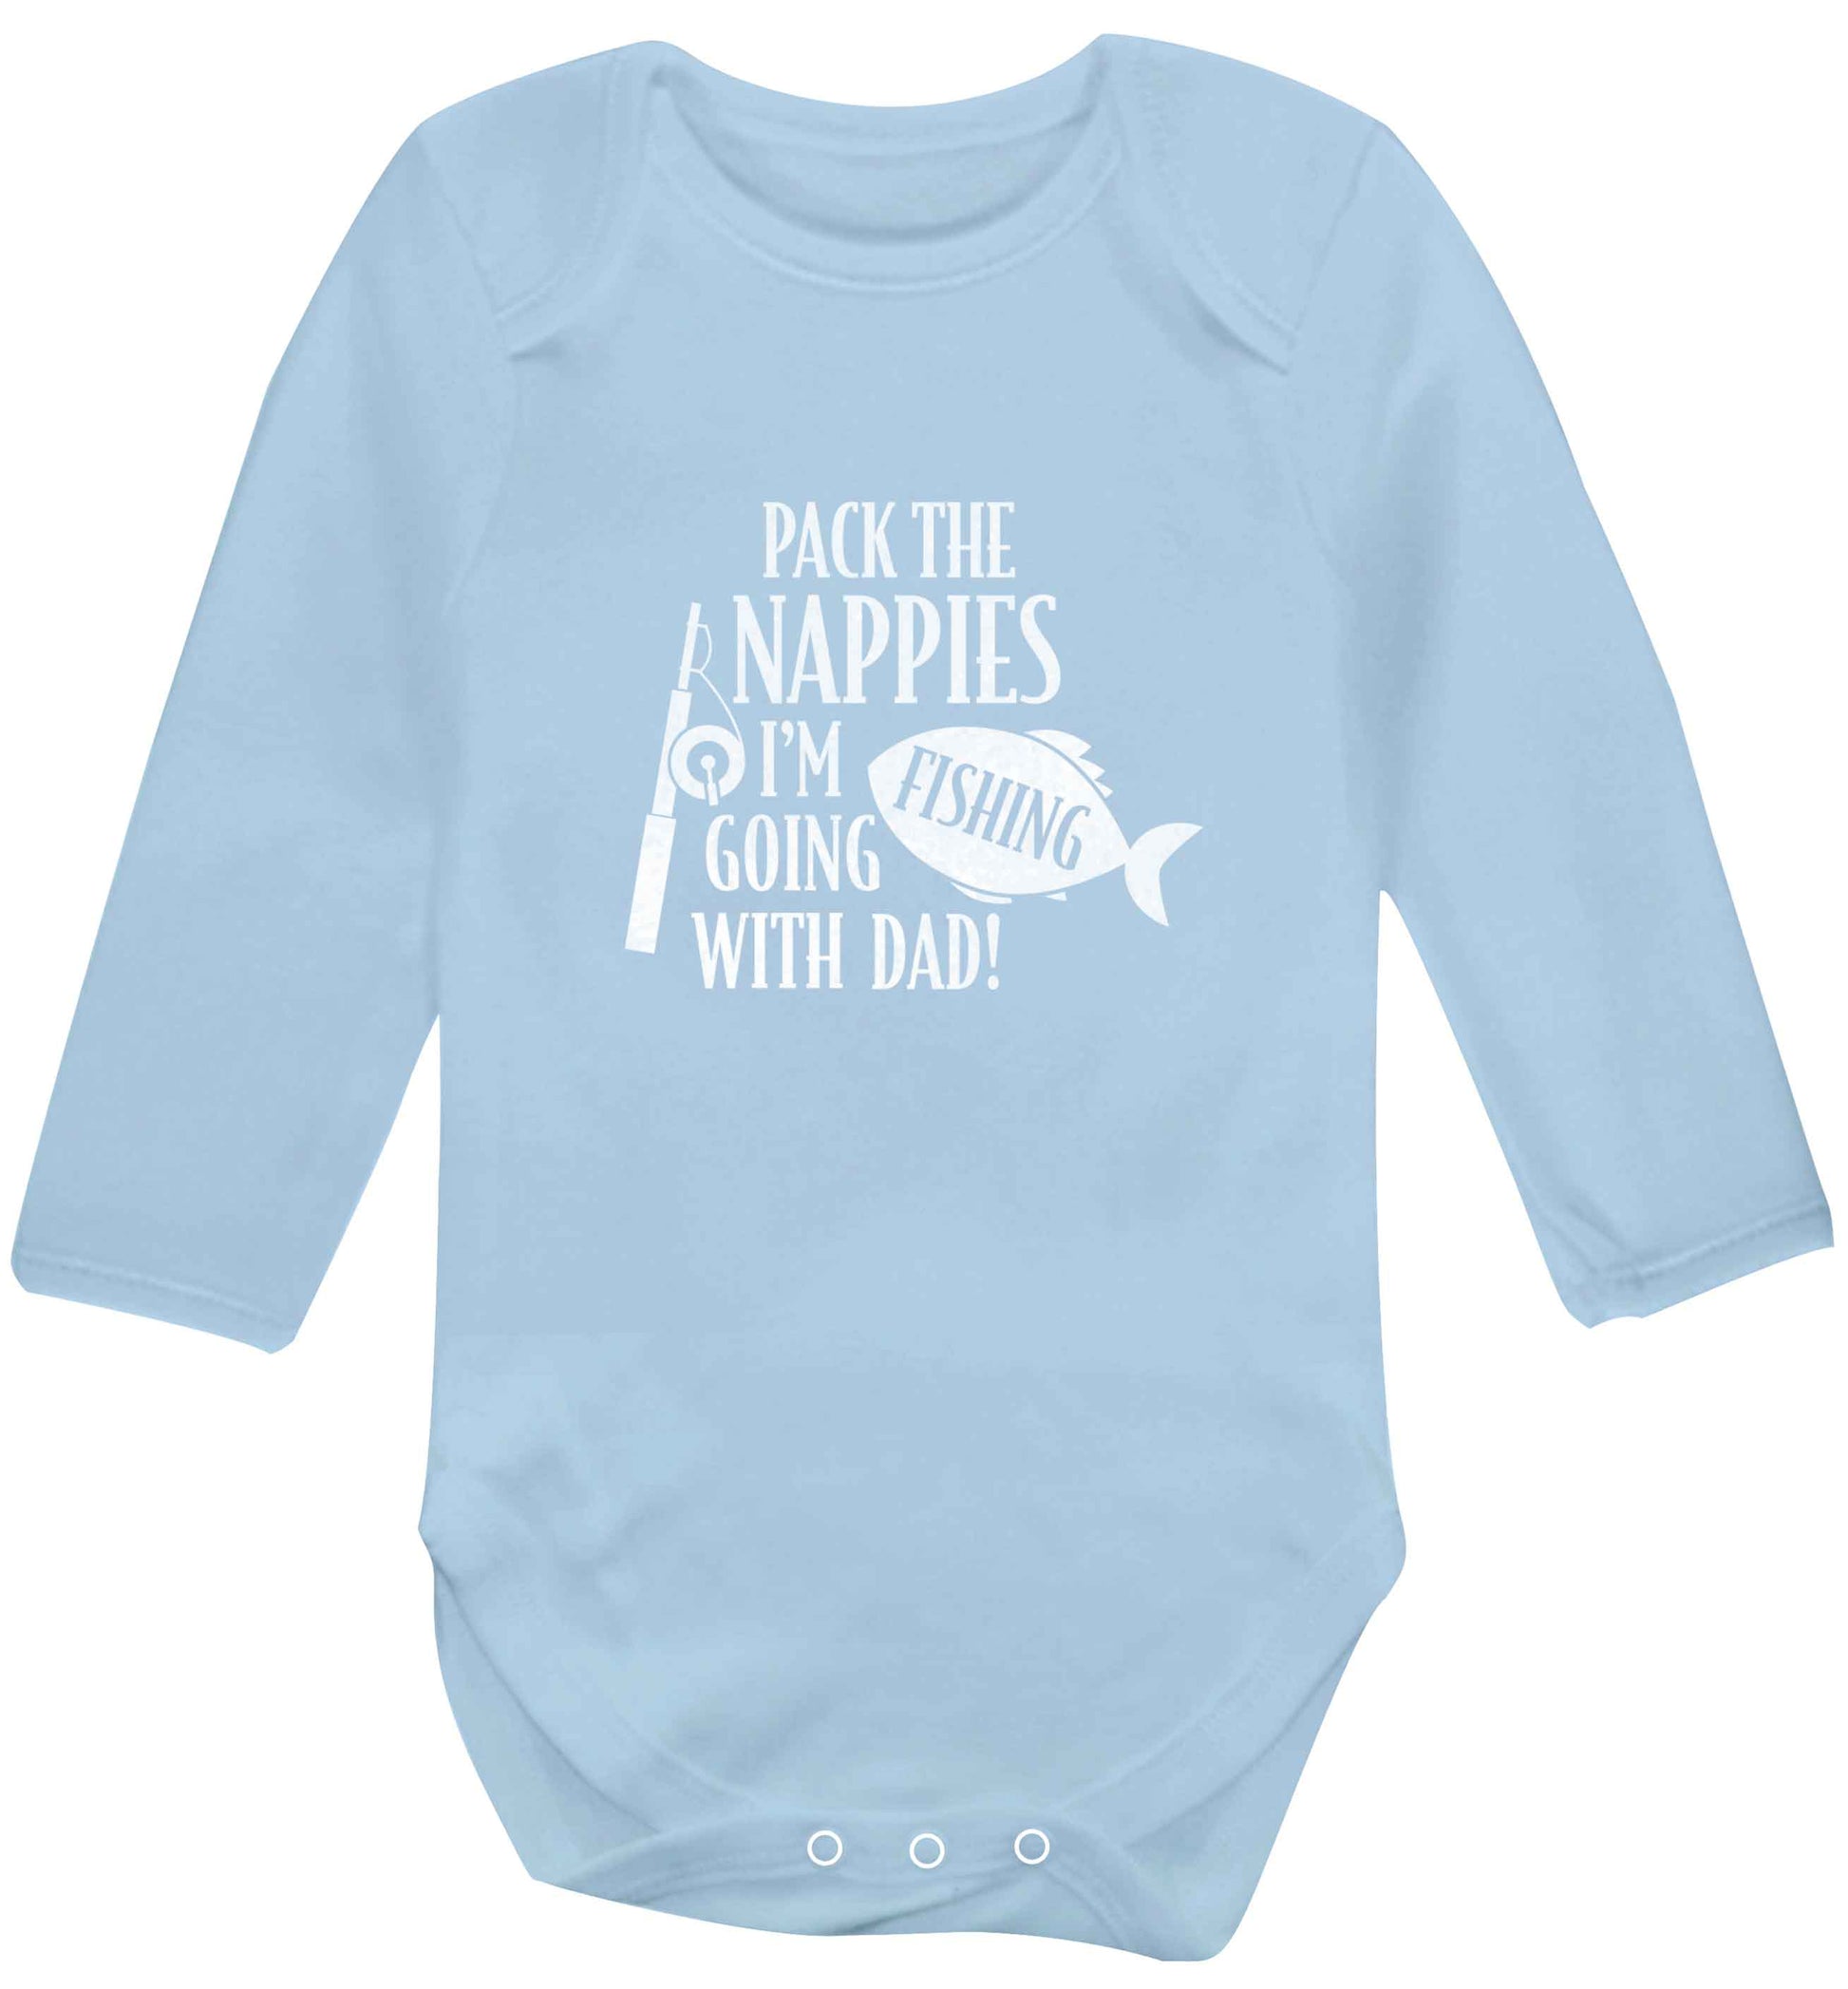 Pack the nappies I'm going fishing with Dad baby vest long sleeved pale blue 6-12 months